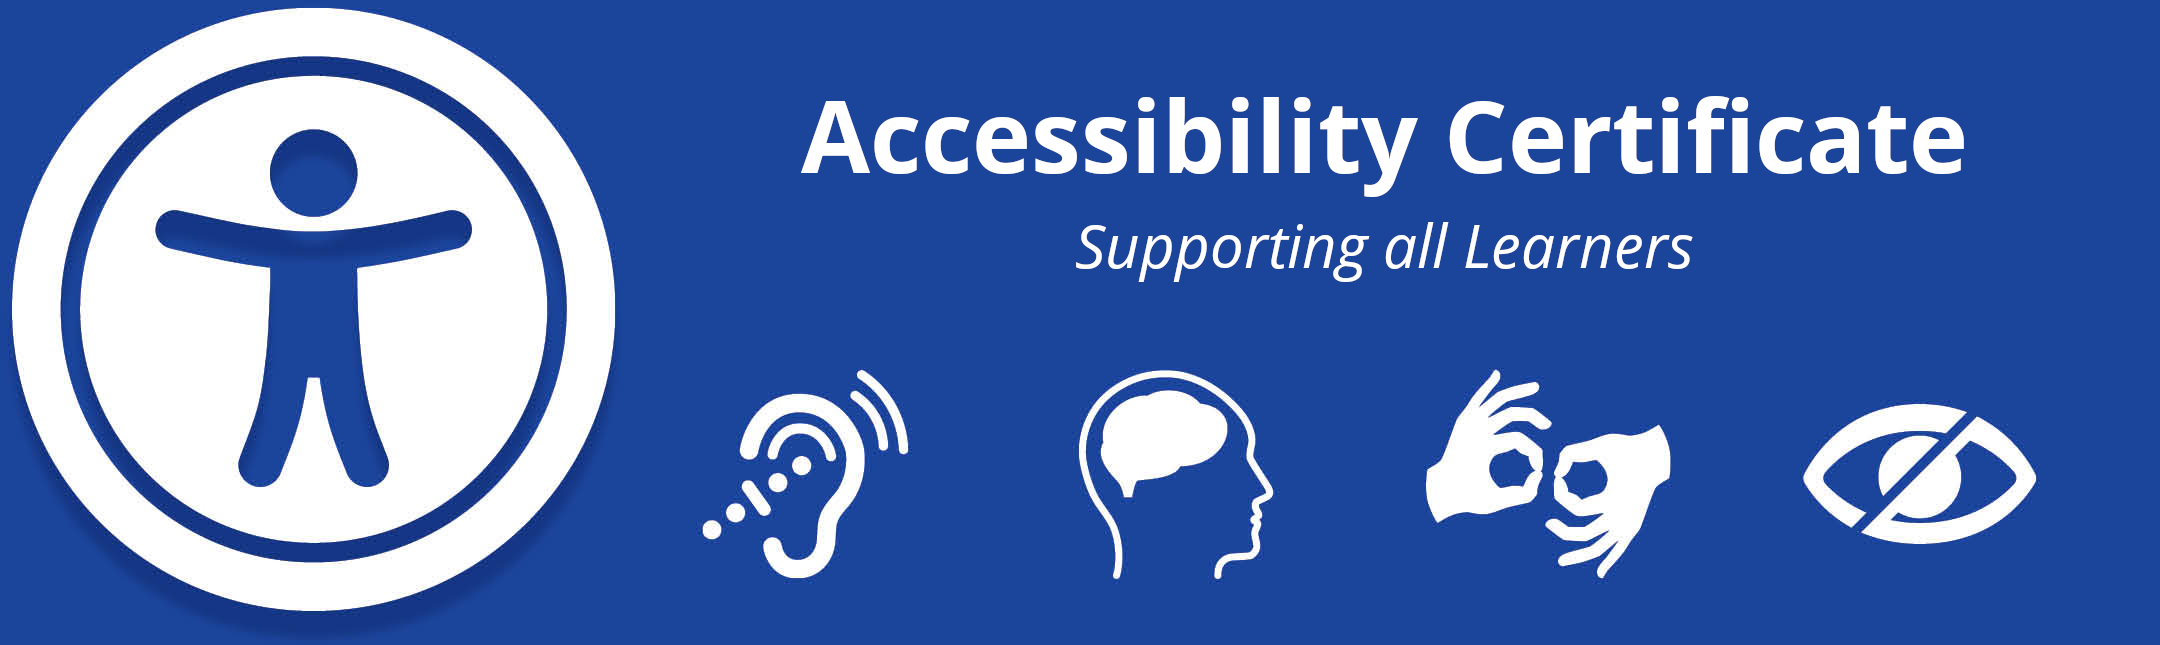 Accessibility Certificate: Supporting All Learners to perceive, use, and understand class content.